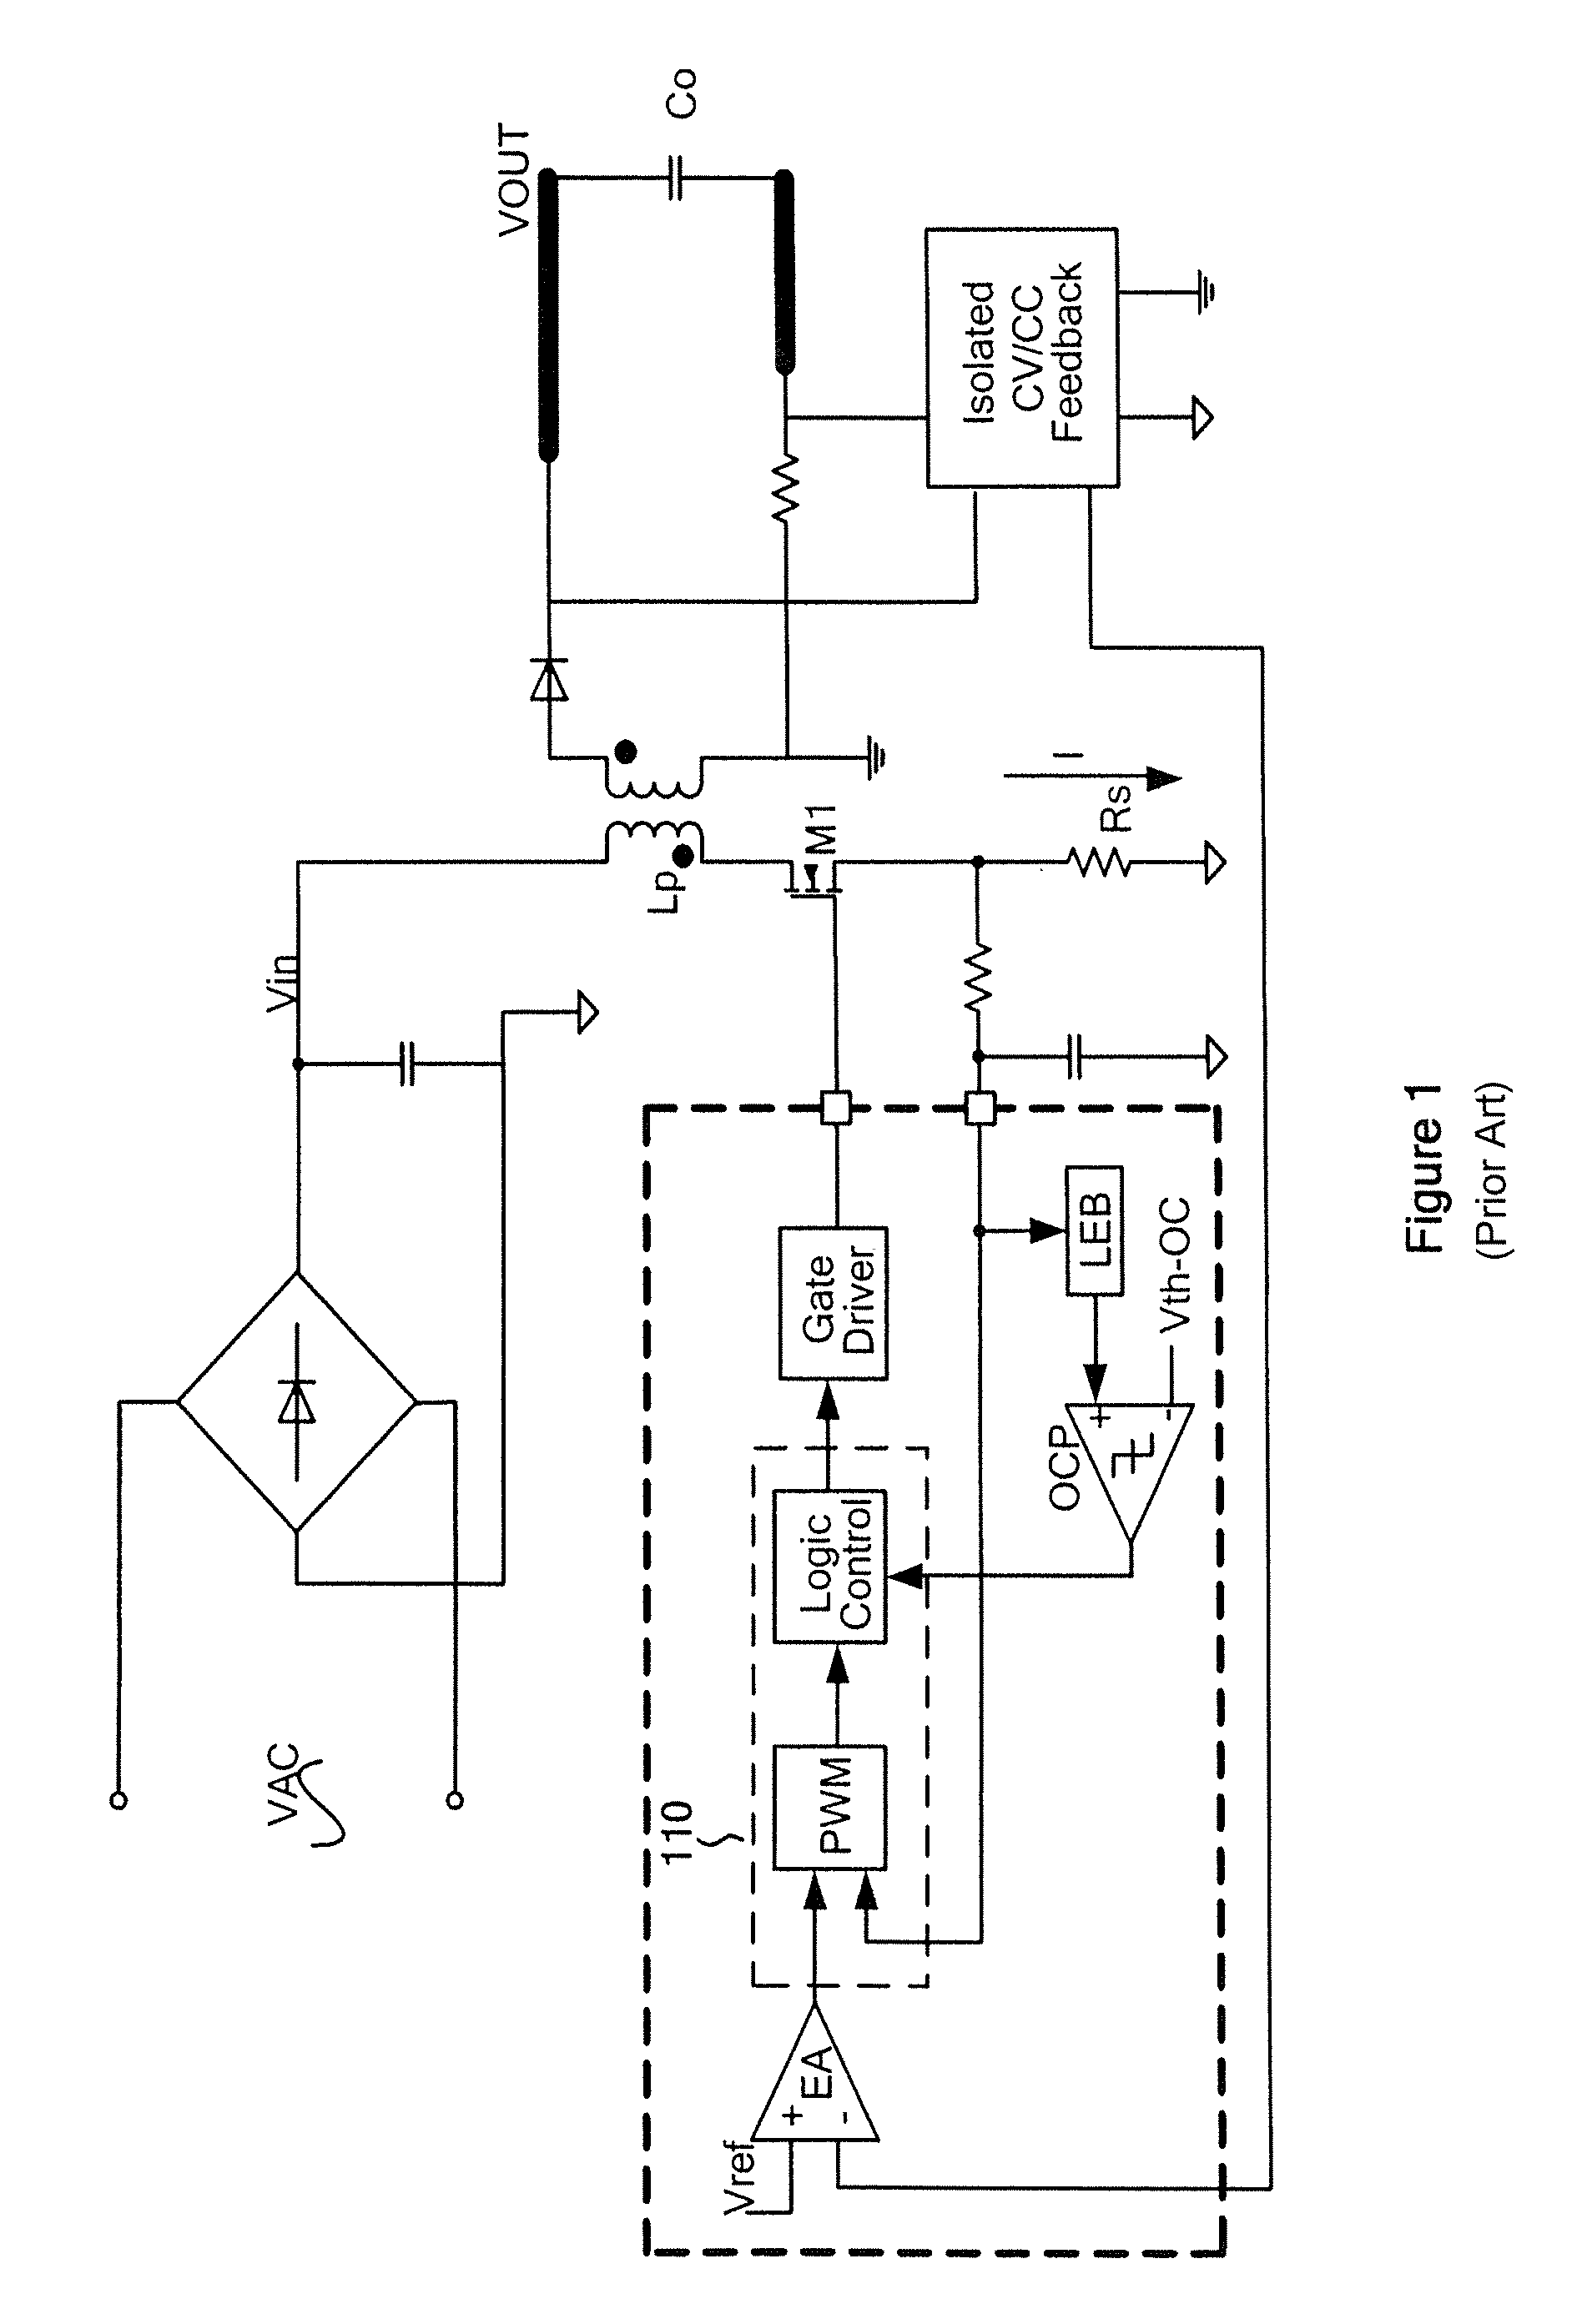 Systems and methods for constant voltage mode and constant current mode in flyback power converter with primary-side sensing and regulation